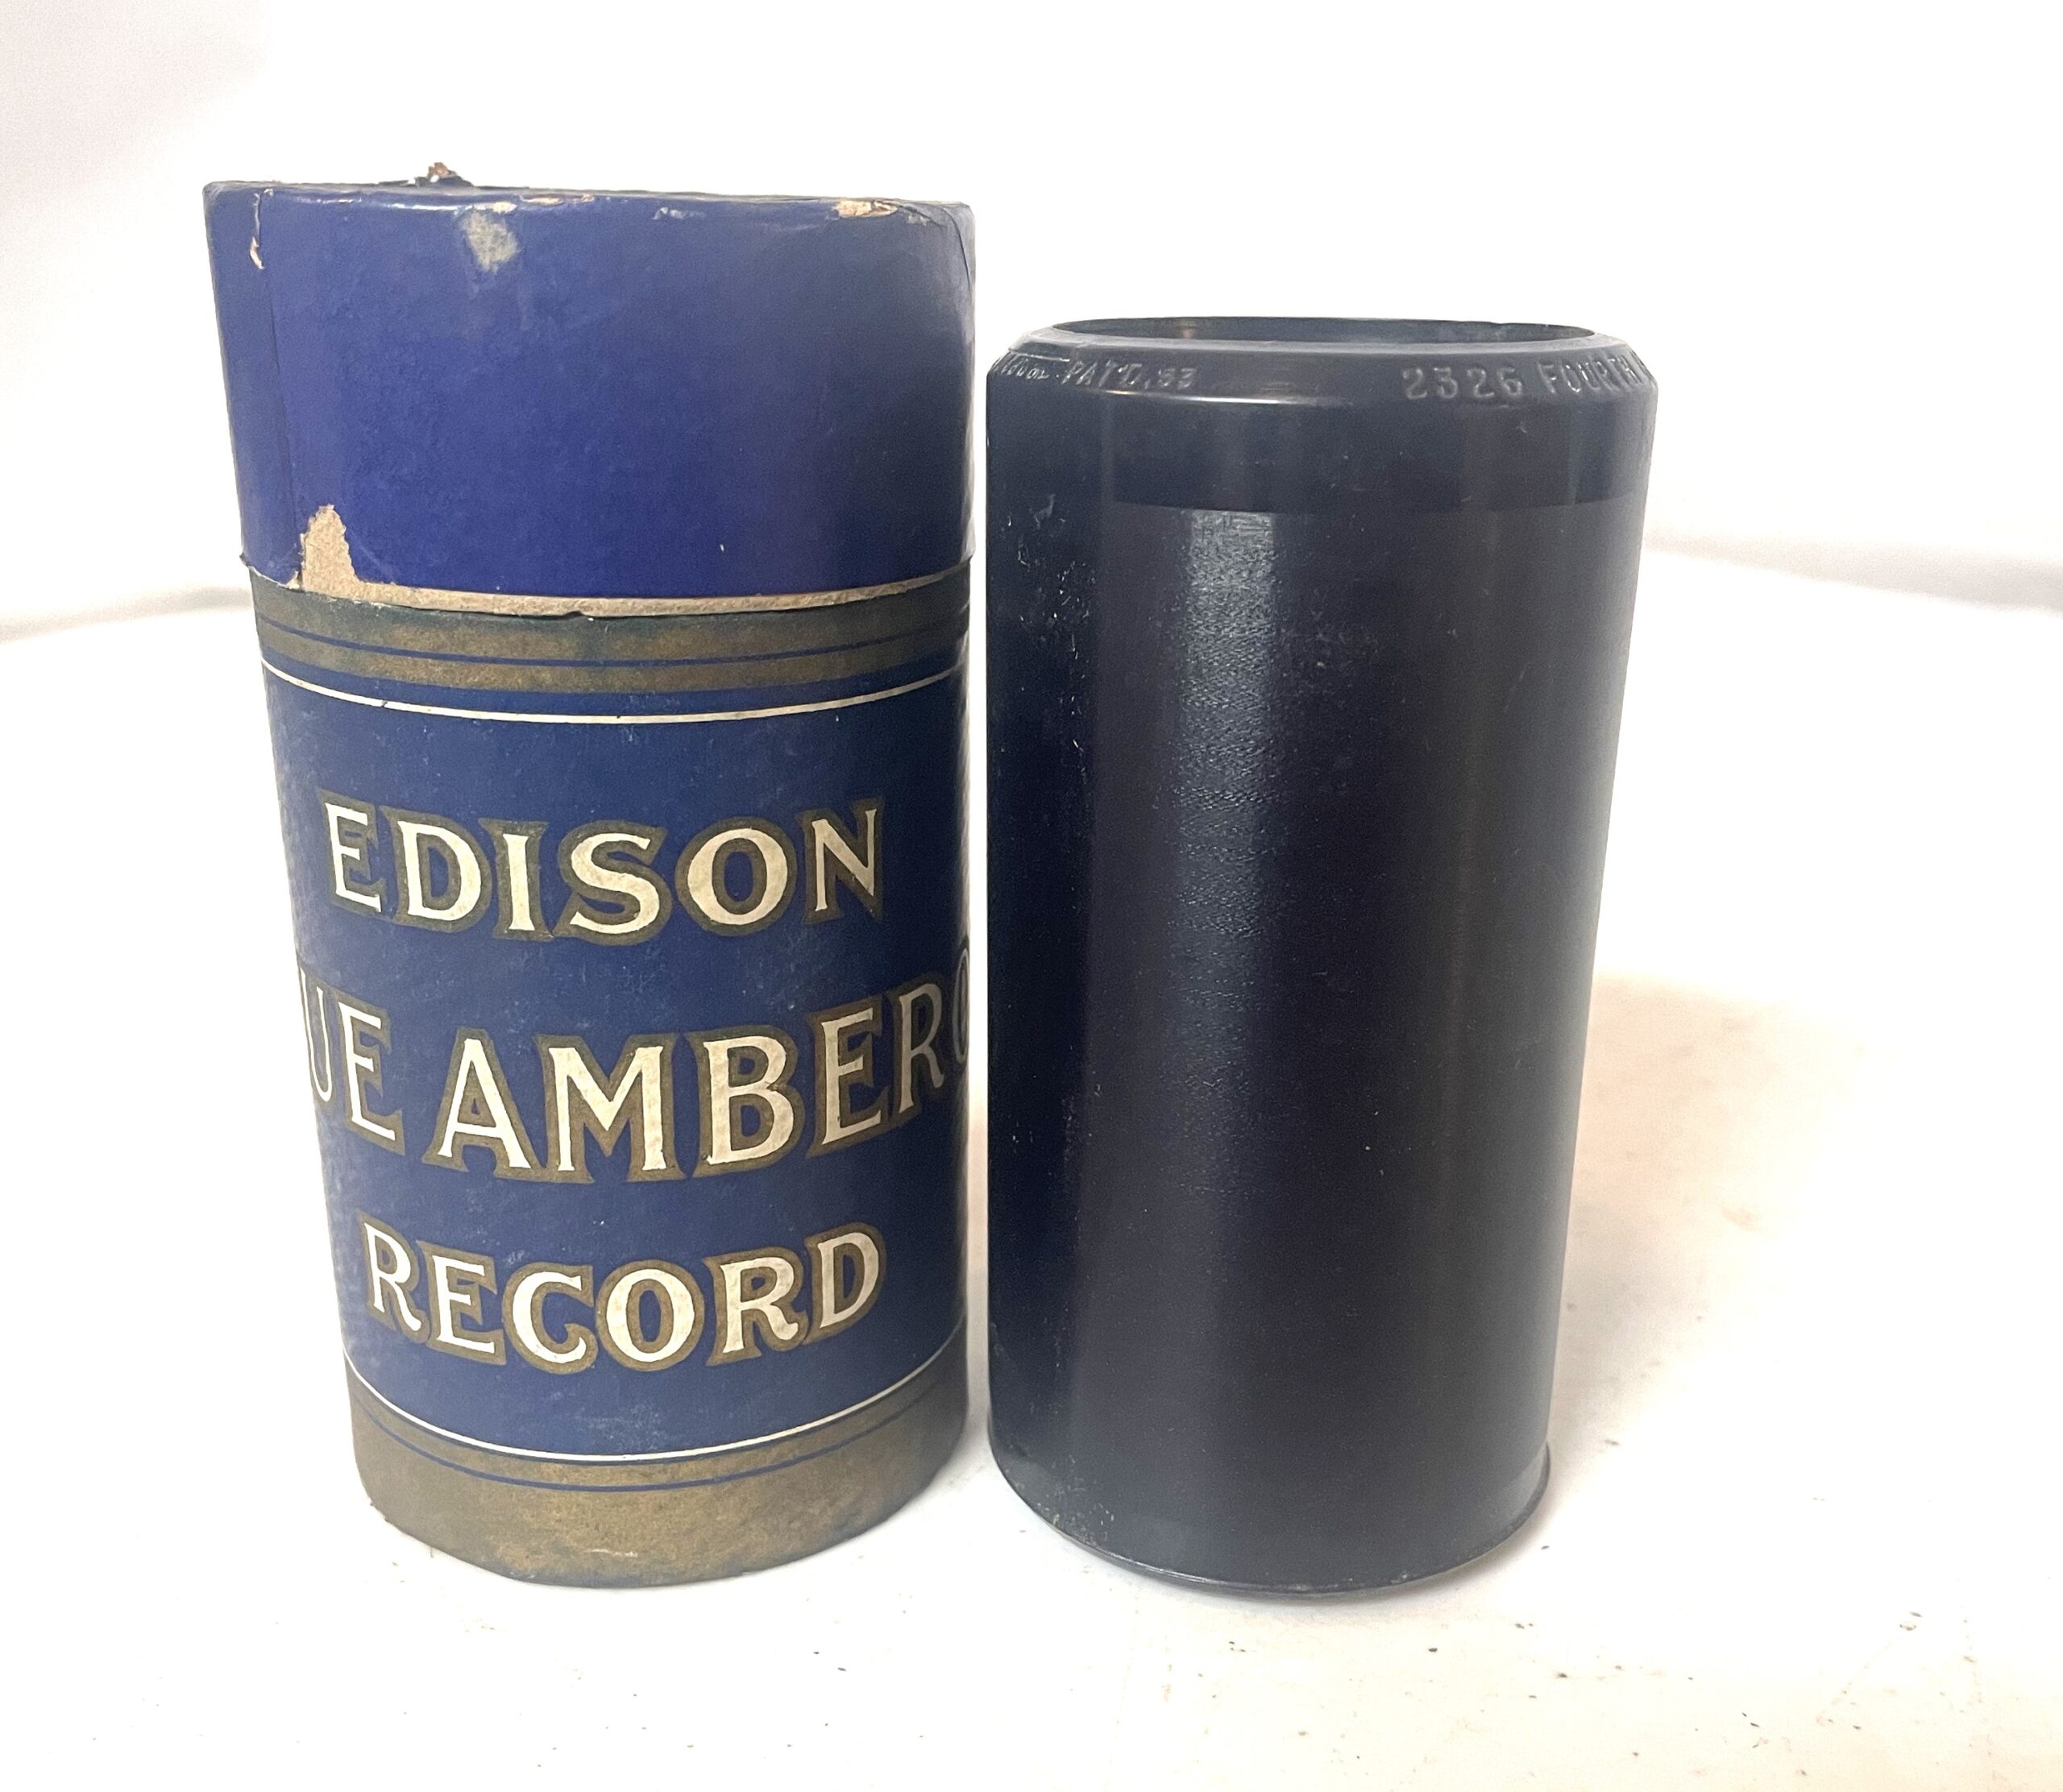 Edison 4-minute Cylinder…”What A Time”